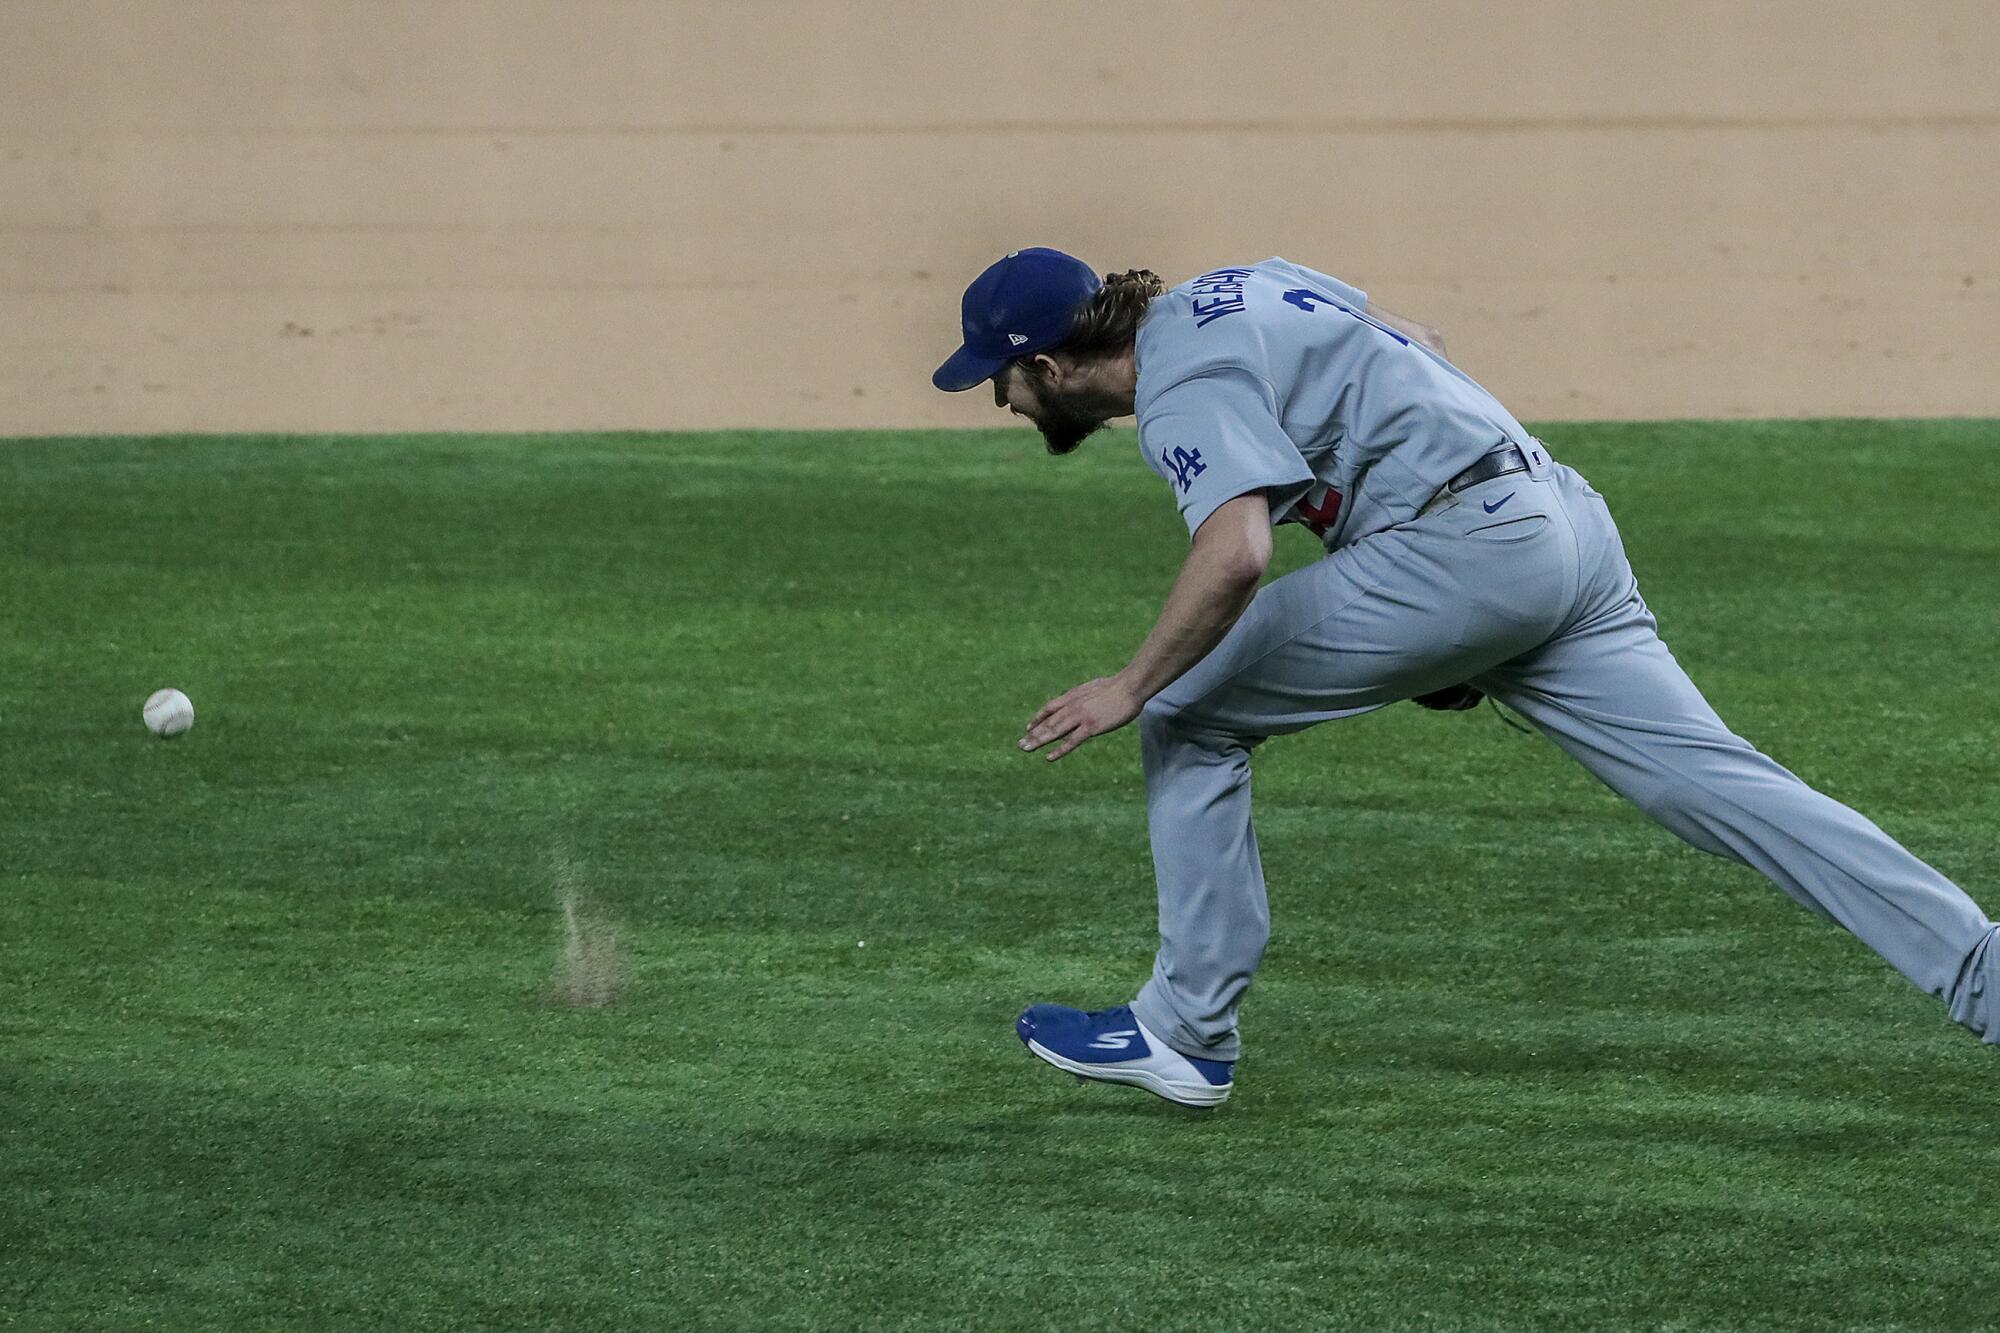 Dodgers starter Clayton Kershaw chases a grounder hit by Atlanta's Ronald Acuna Jr.